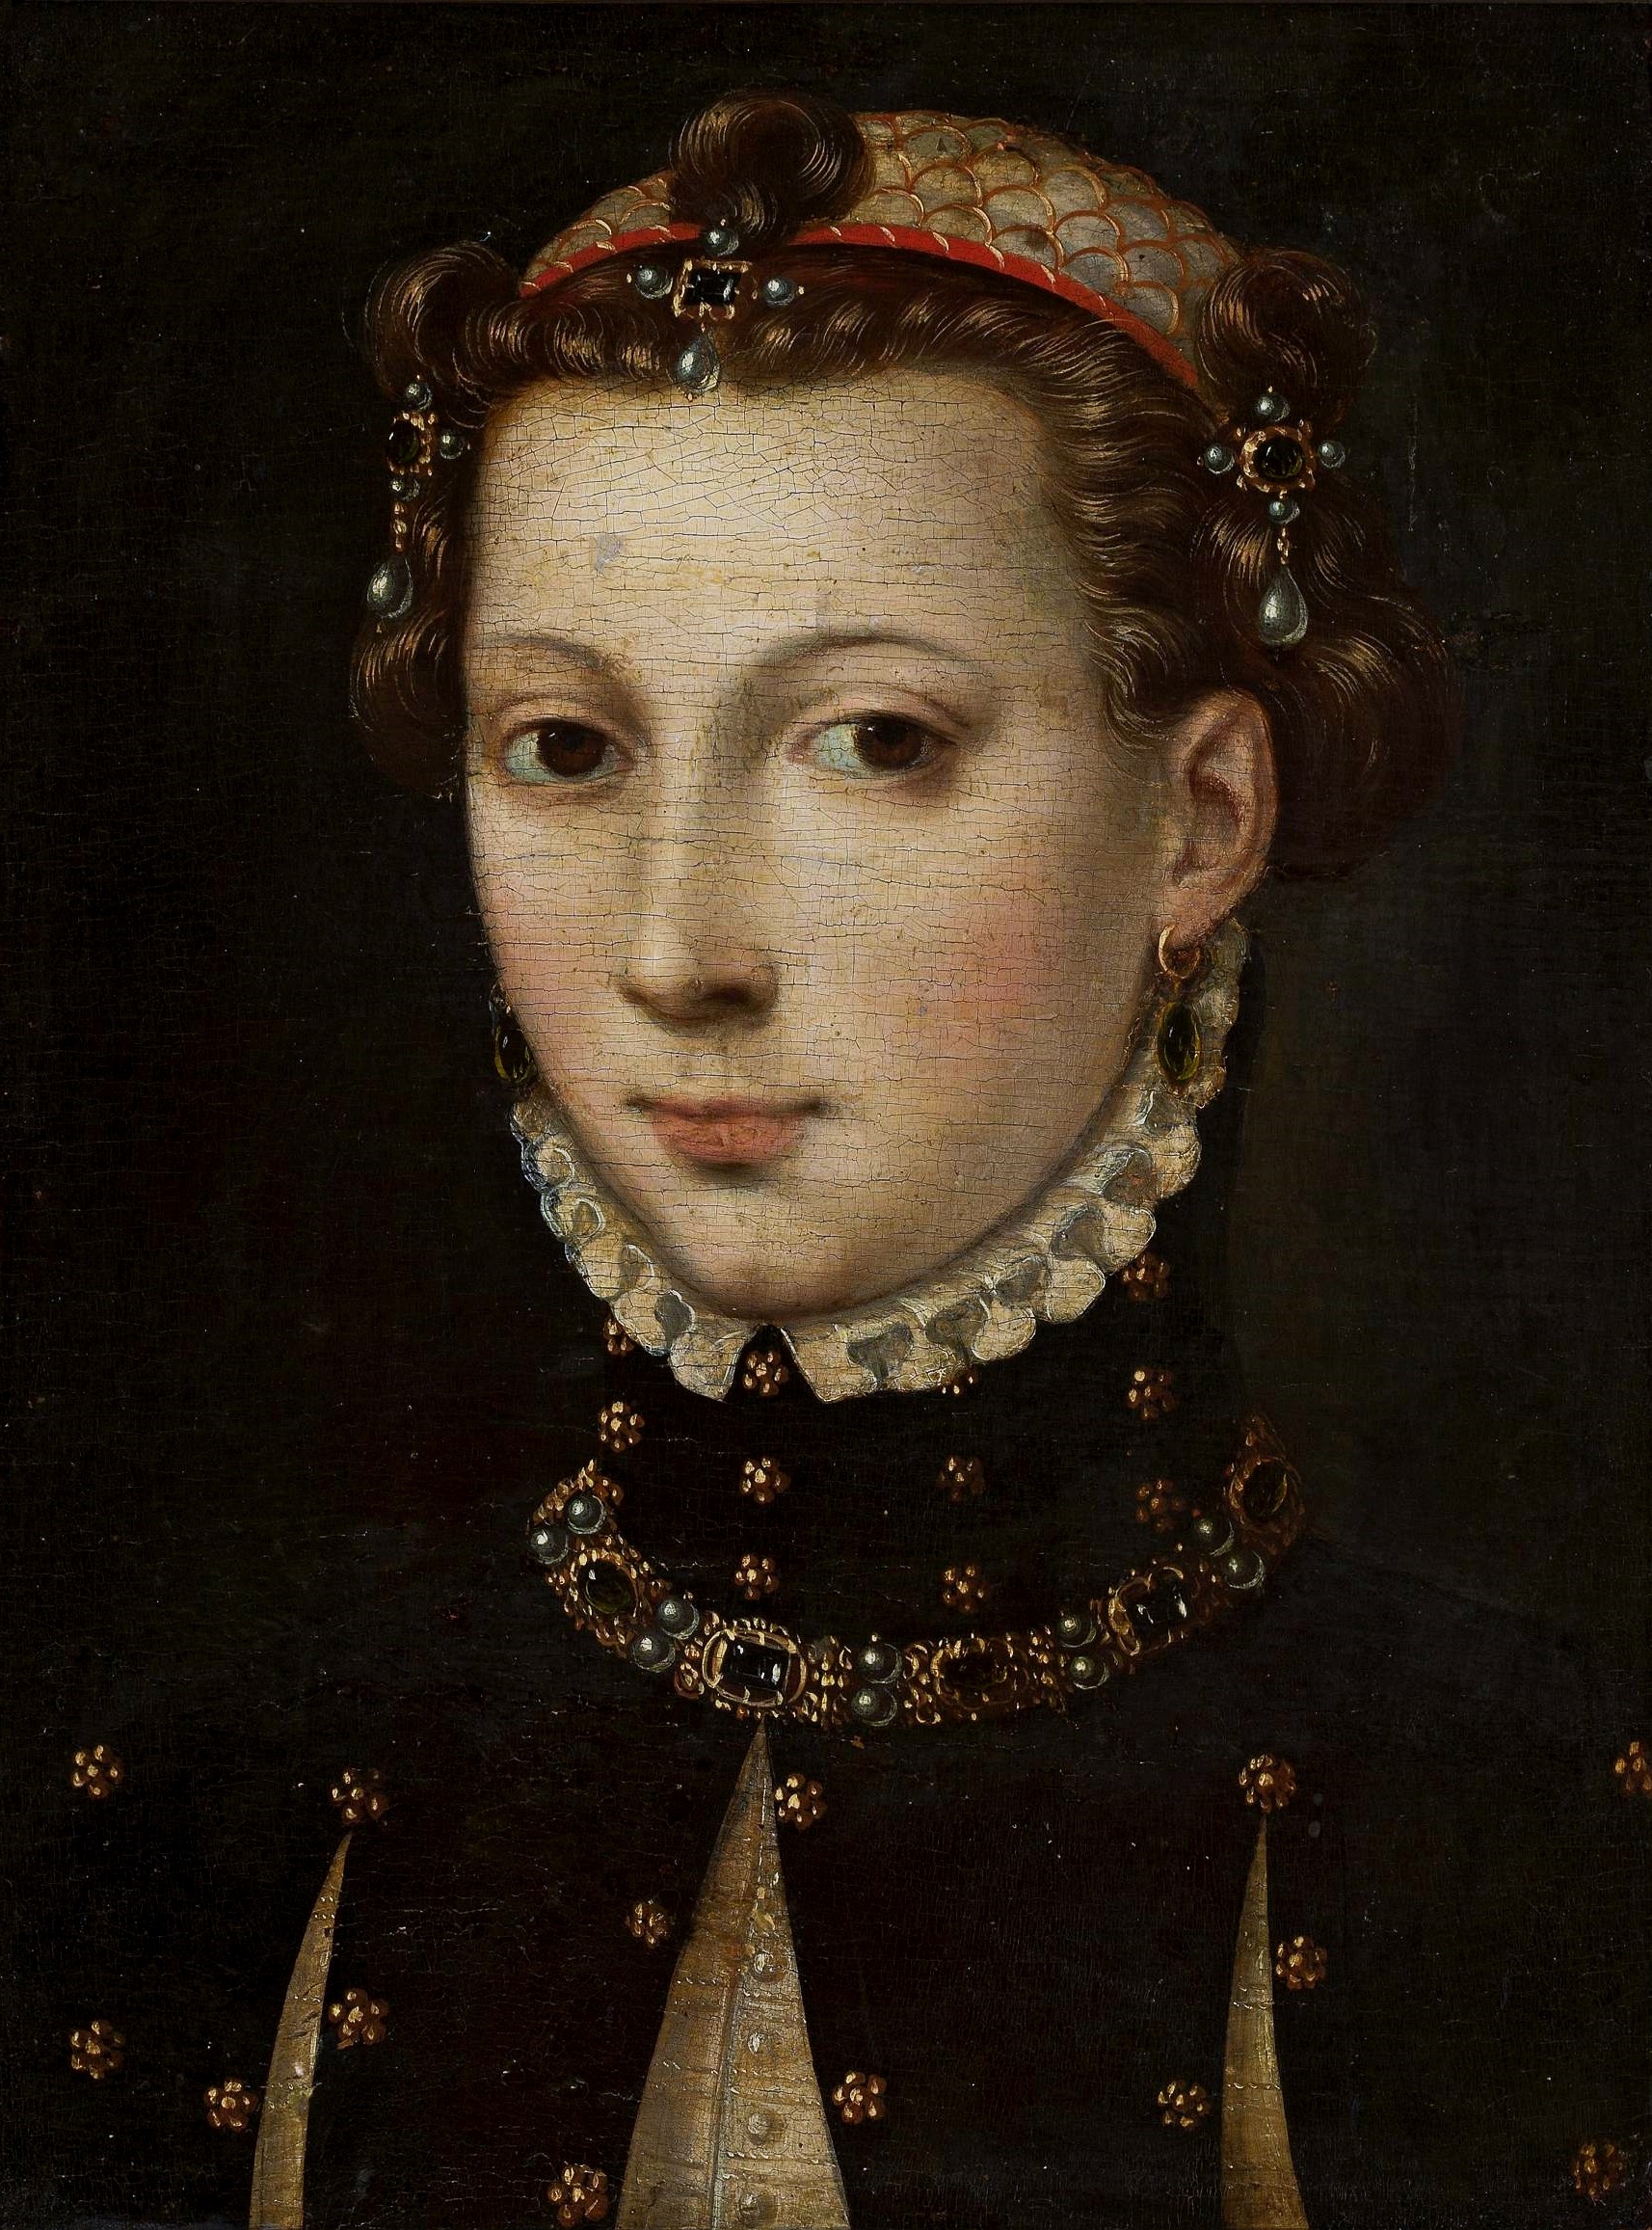 https://upload.wikimedia.org/wikipedia/commons/b/b8/Clouet_Portrait_of_a_young_lady.jpg